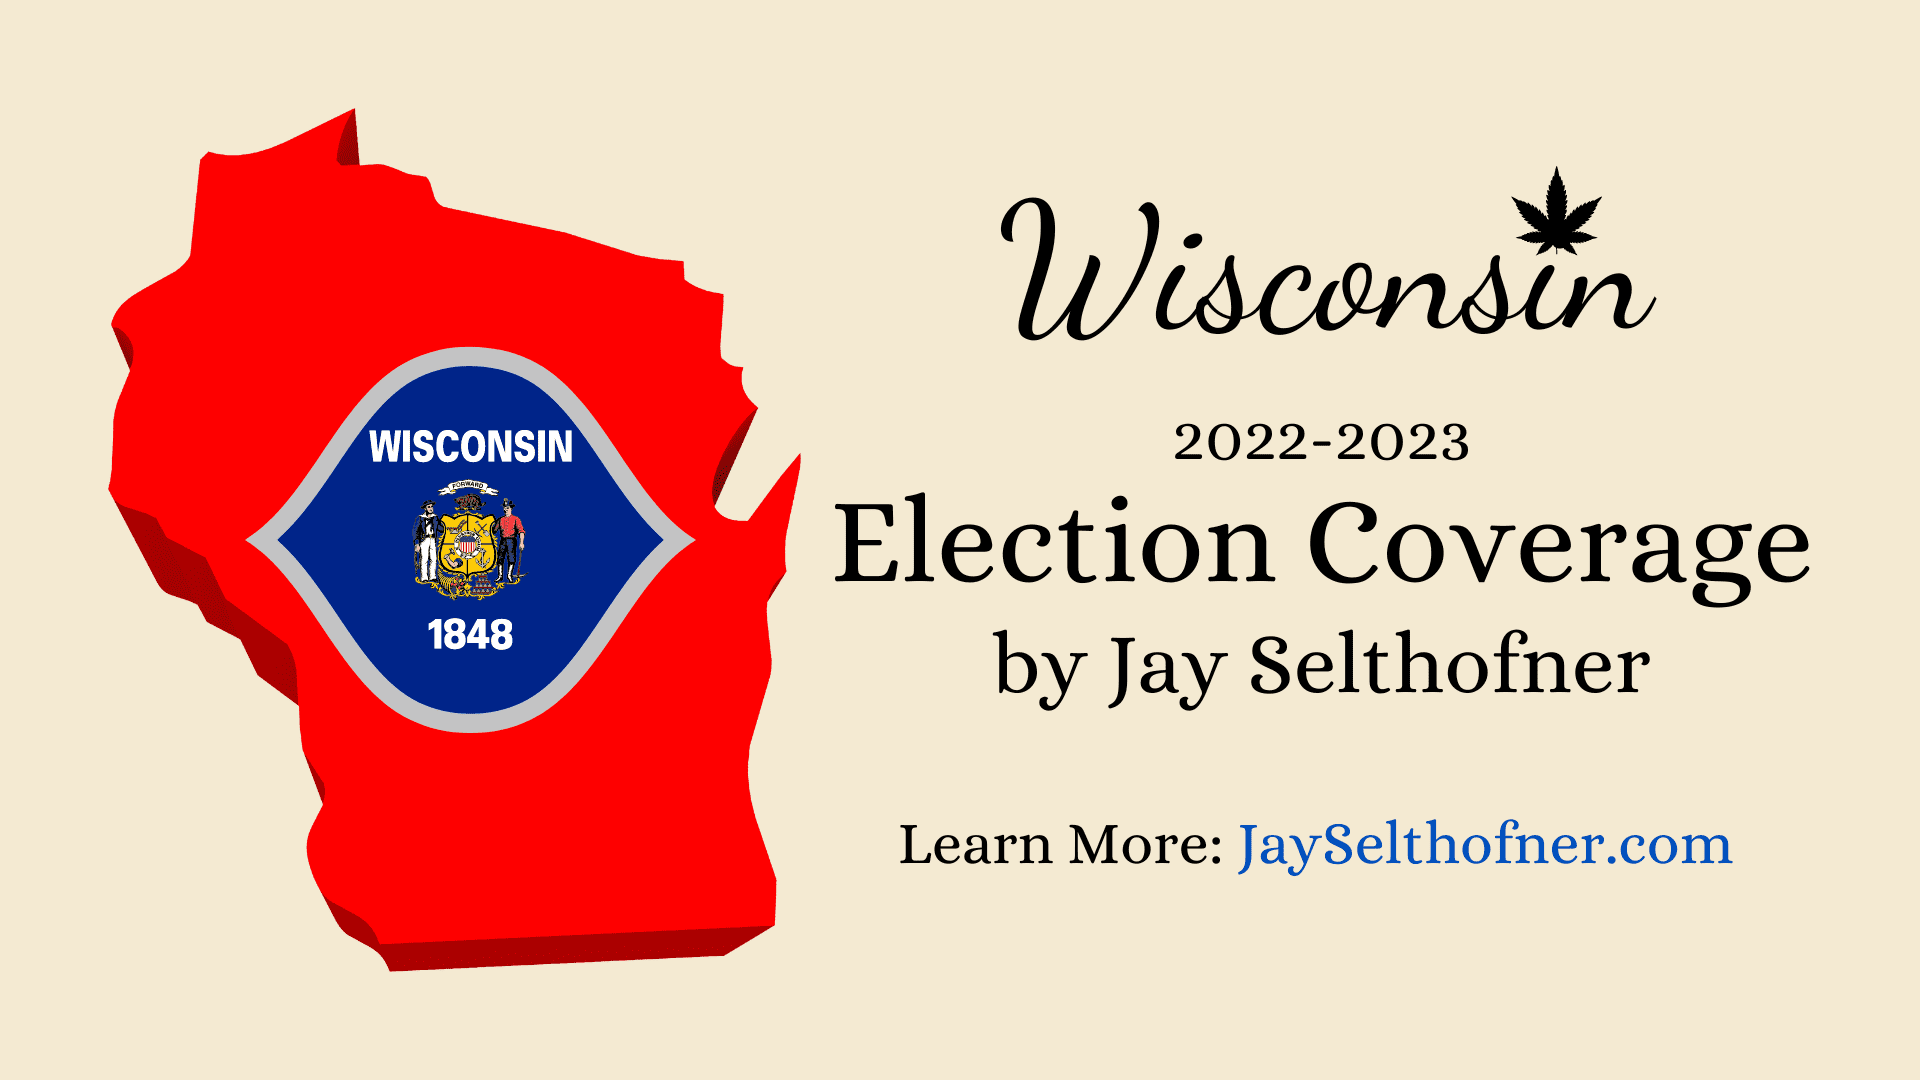 Wisconsin 2022-2023 Election Coverage by Jay Selthofner